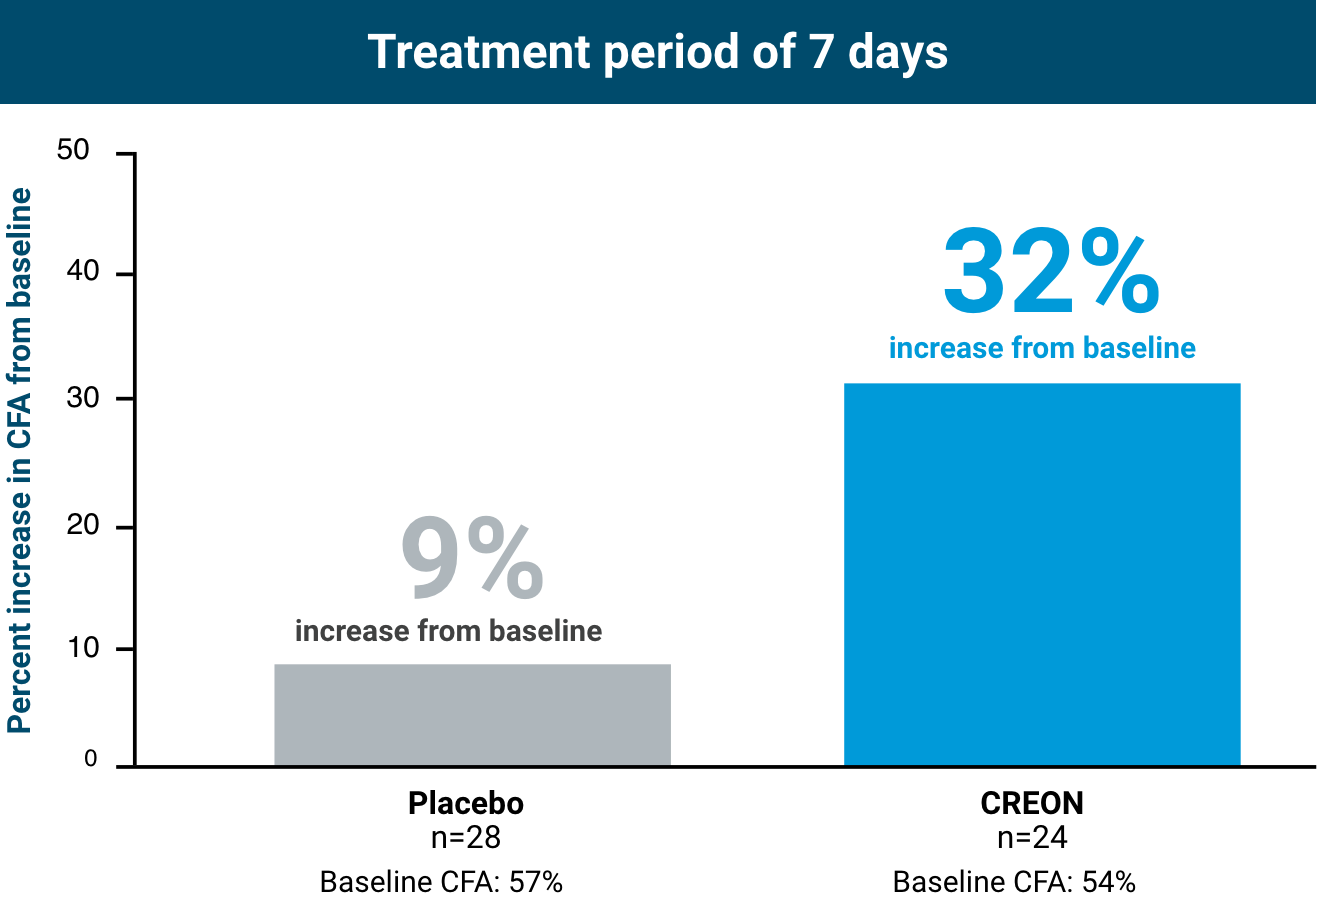 With a treatment period of 7 days, Placebo had a 9% increase in CFA from baseline, and CREON® had a 32% increase in CFA from baseline.